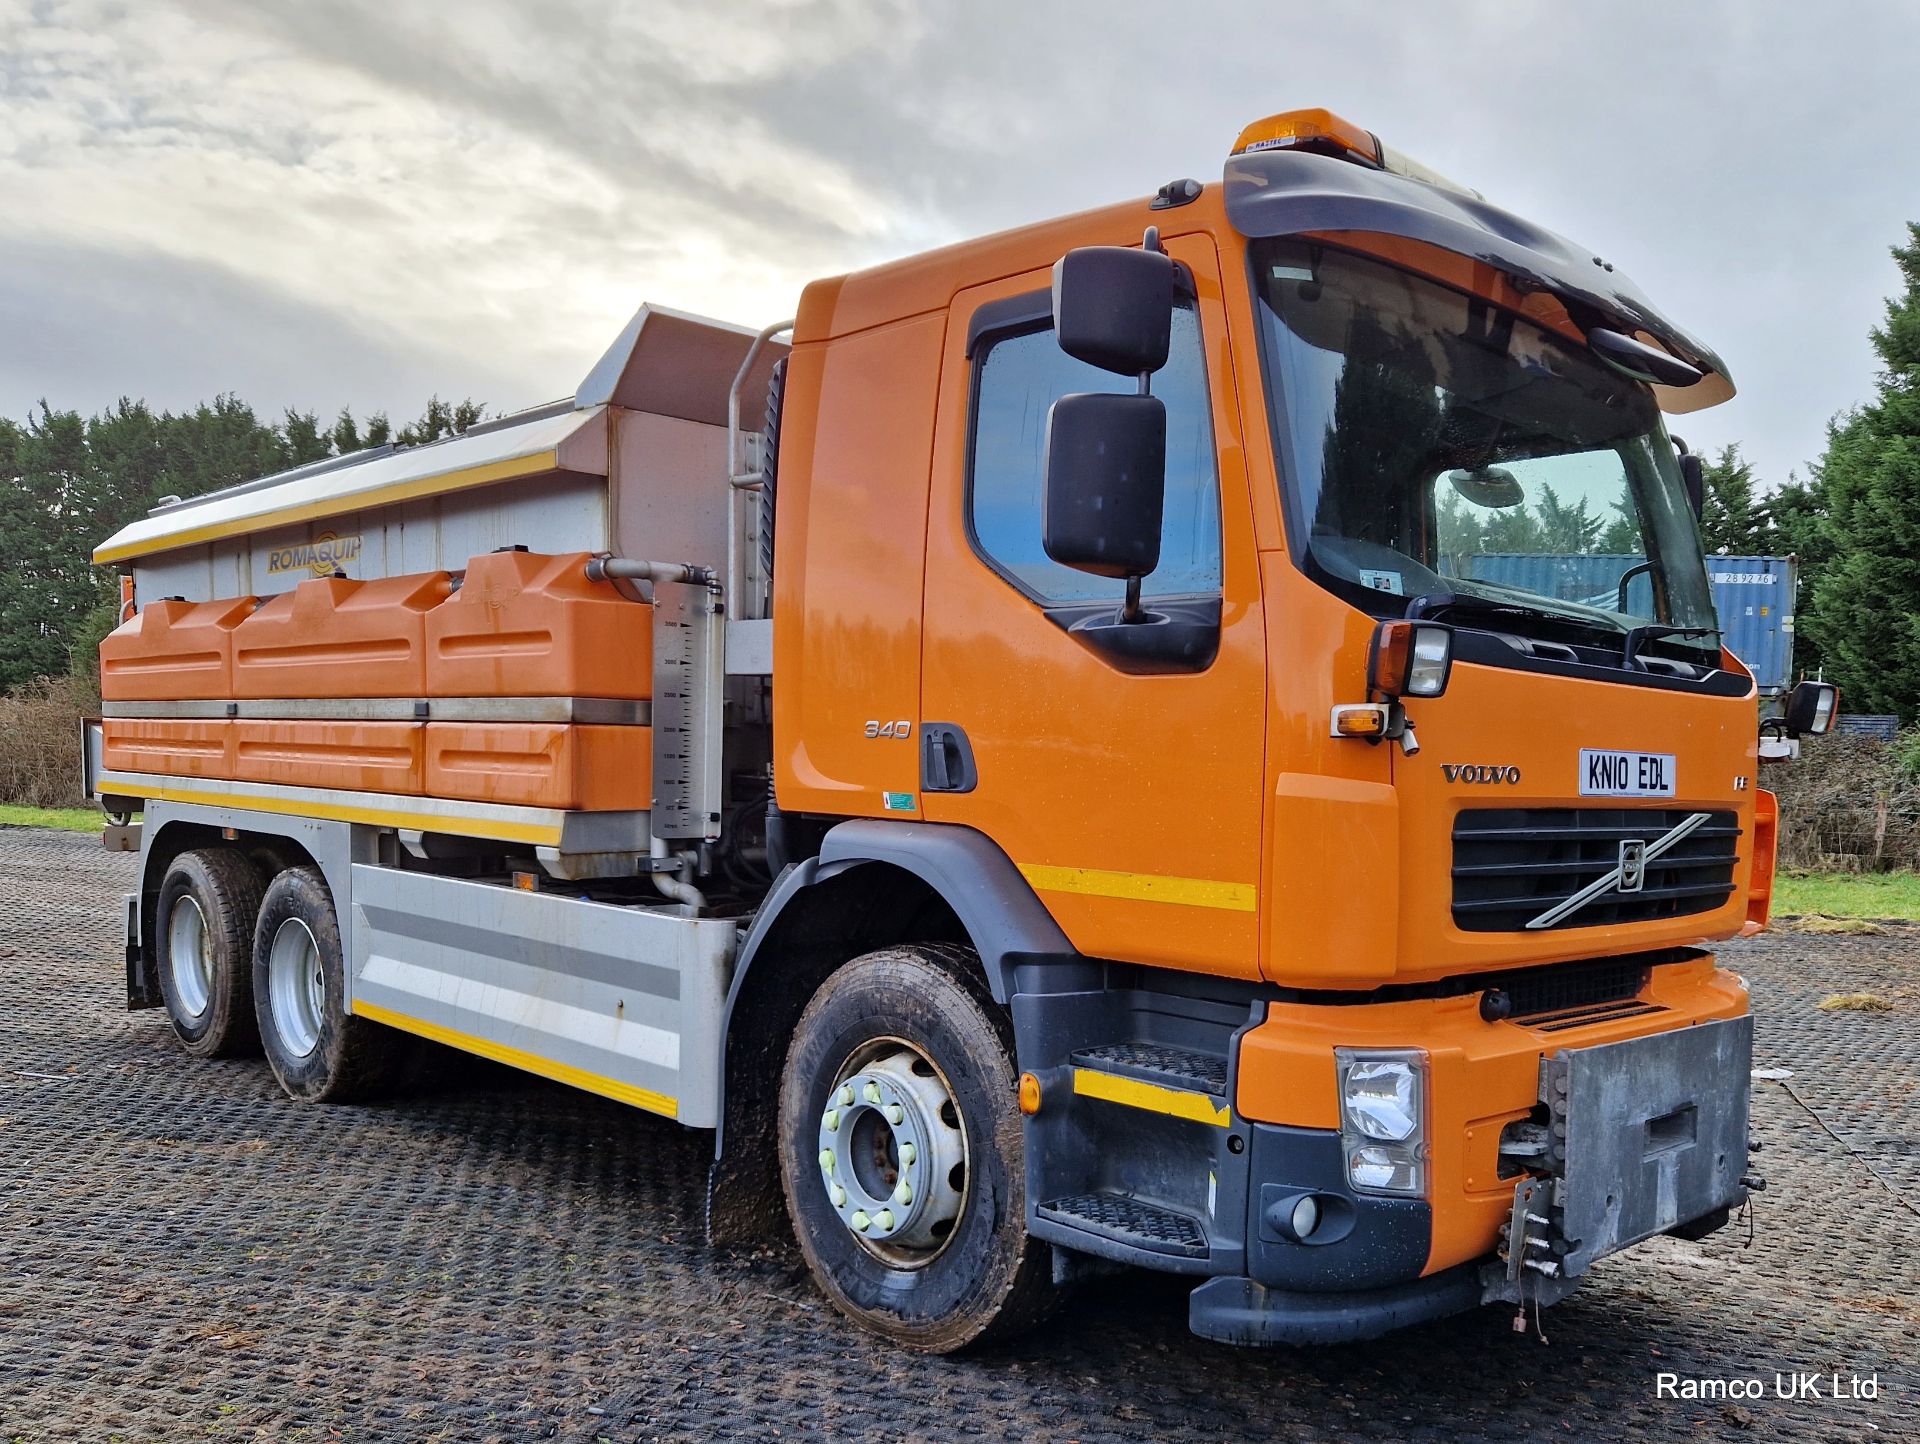 2010 (reg KN10 EDL) Volvo FE 340 6x4 with Romaquip wet gritter mount.